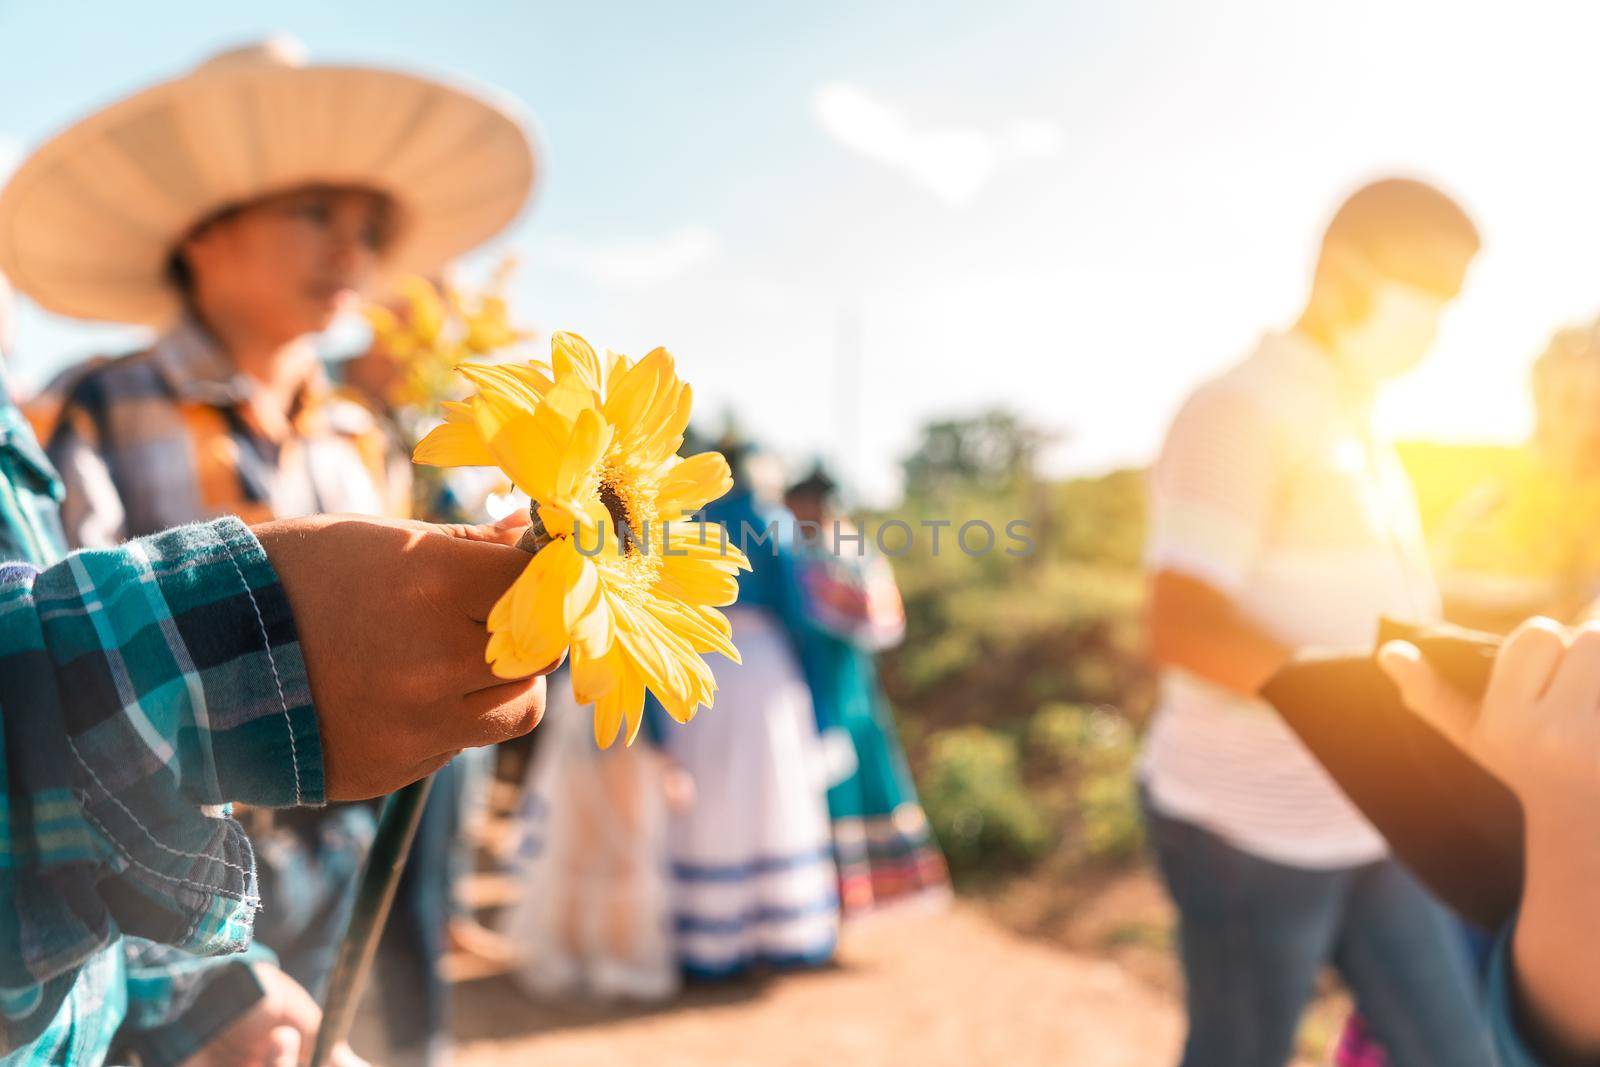 Close Up on the hand of a Latino teenager from Nicaragua holding a sunflower during a display of Latin American culture by cfalvarez